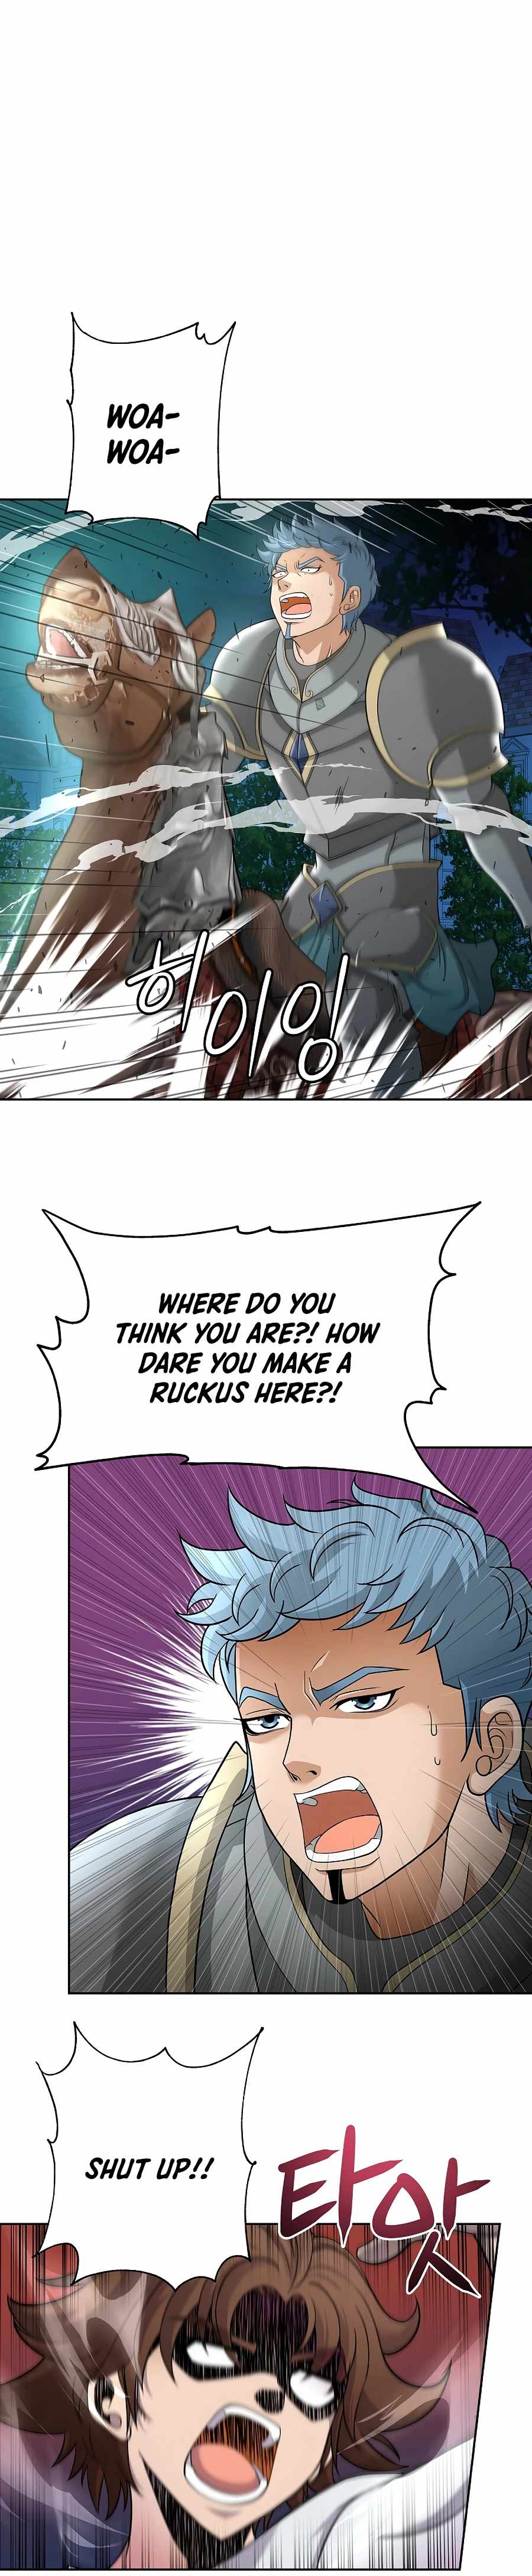 The Rebirth Of The Violent Dragon King - Page 3